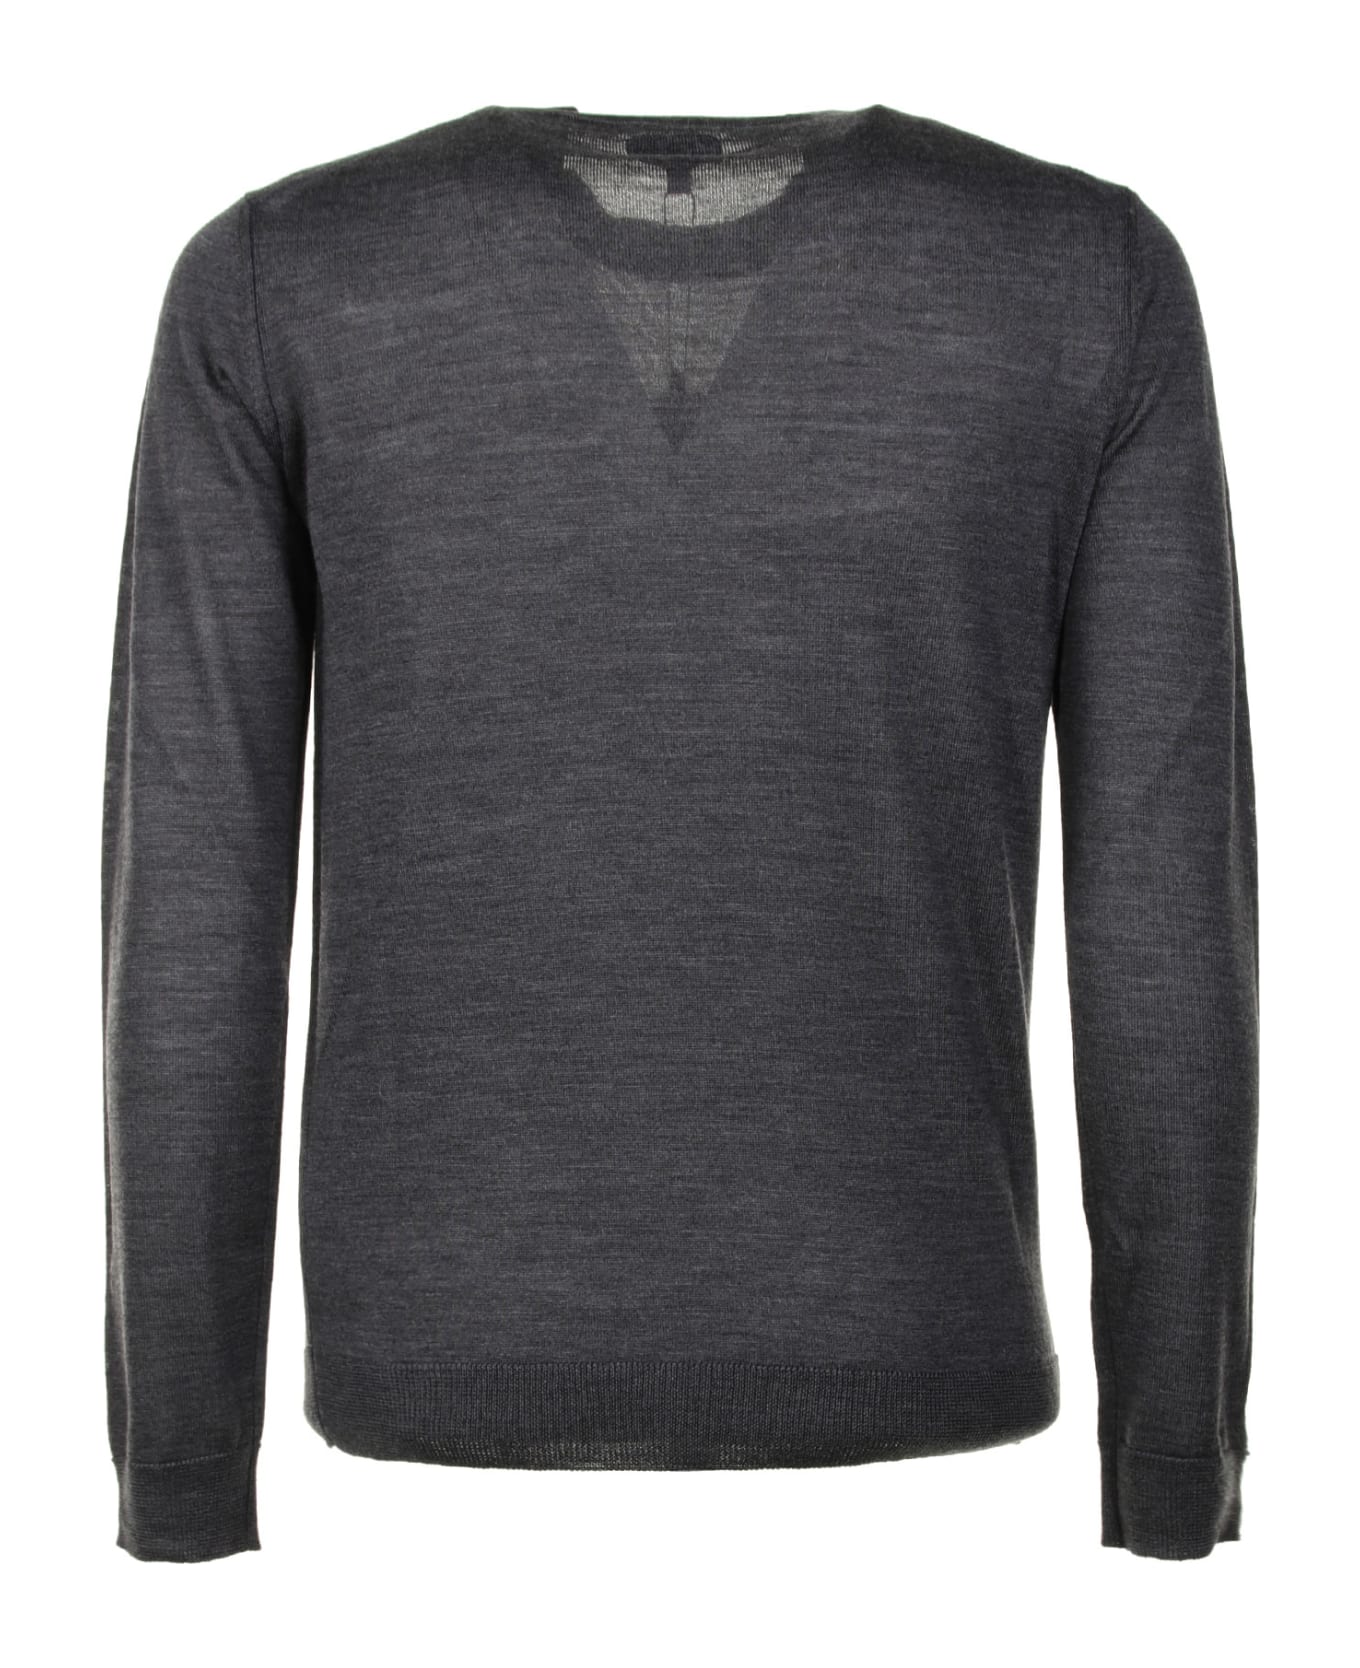 Woolrich Crewneck Sweater - CHARCOAL ニットウェア